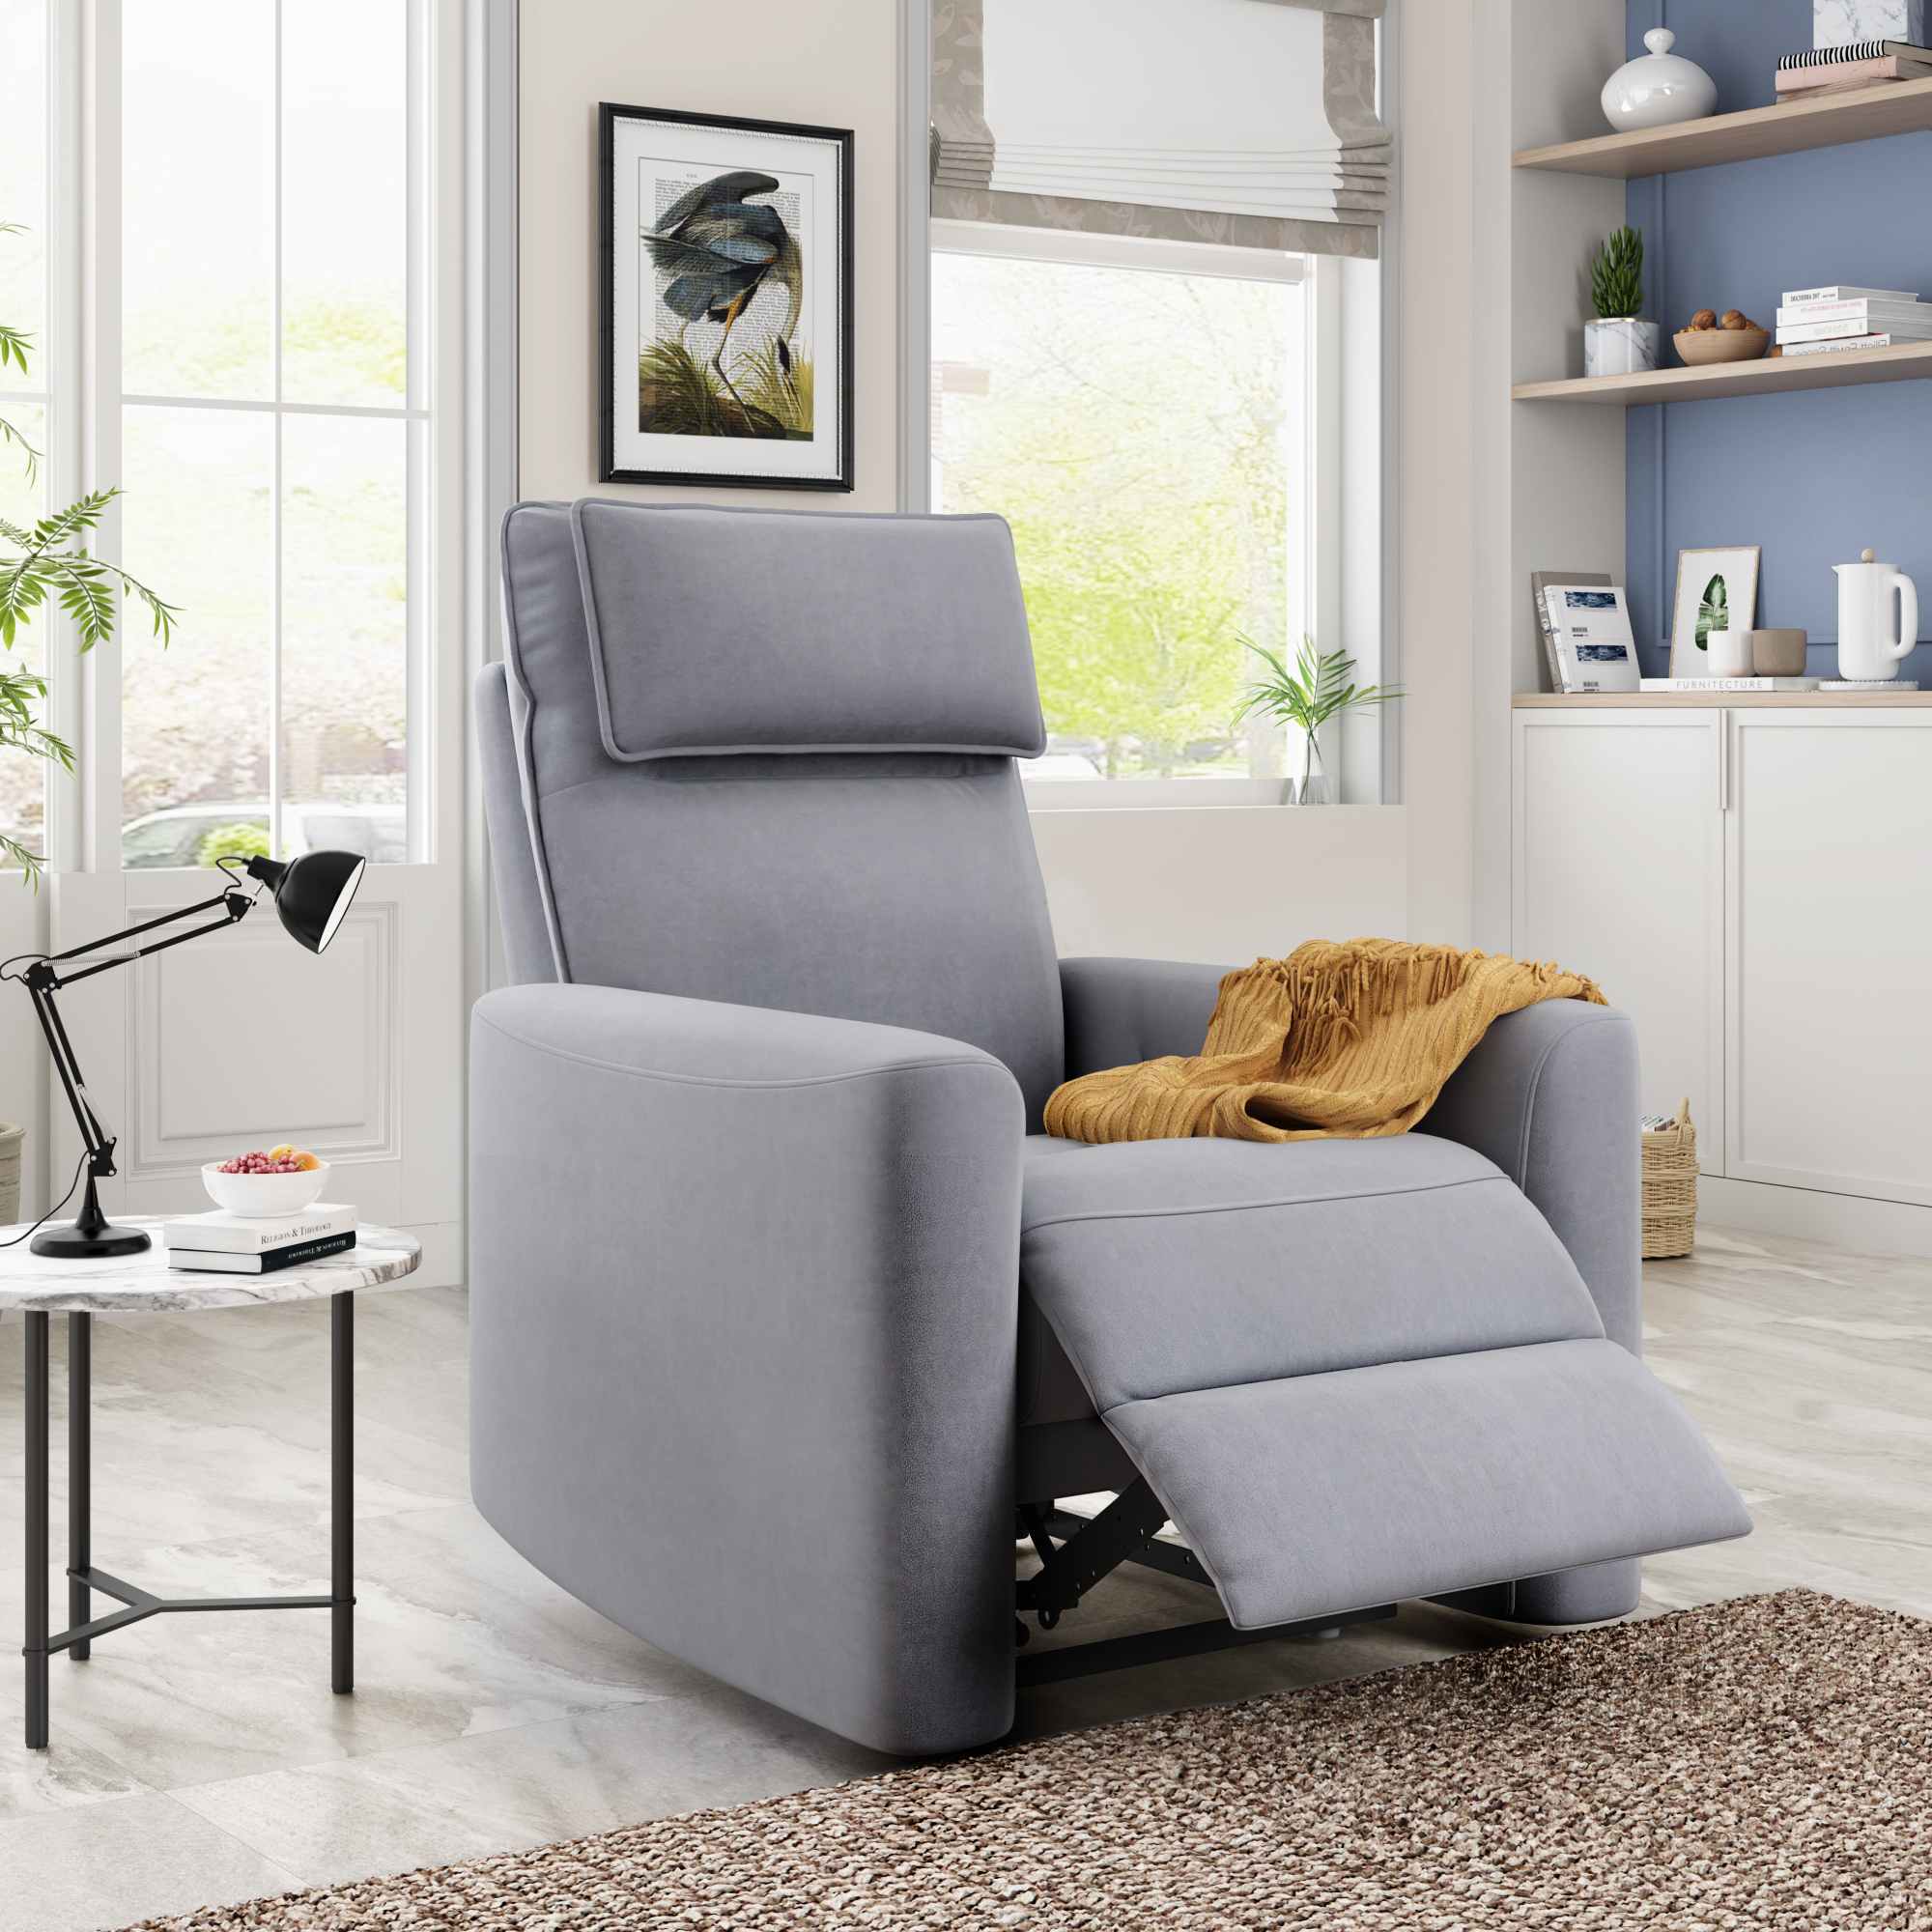 Recliner Chair with Padded Seat - SG000185AAA